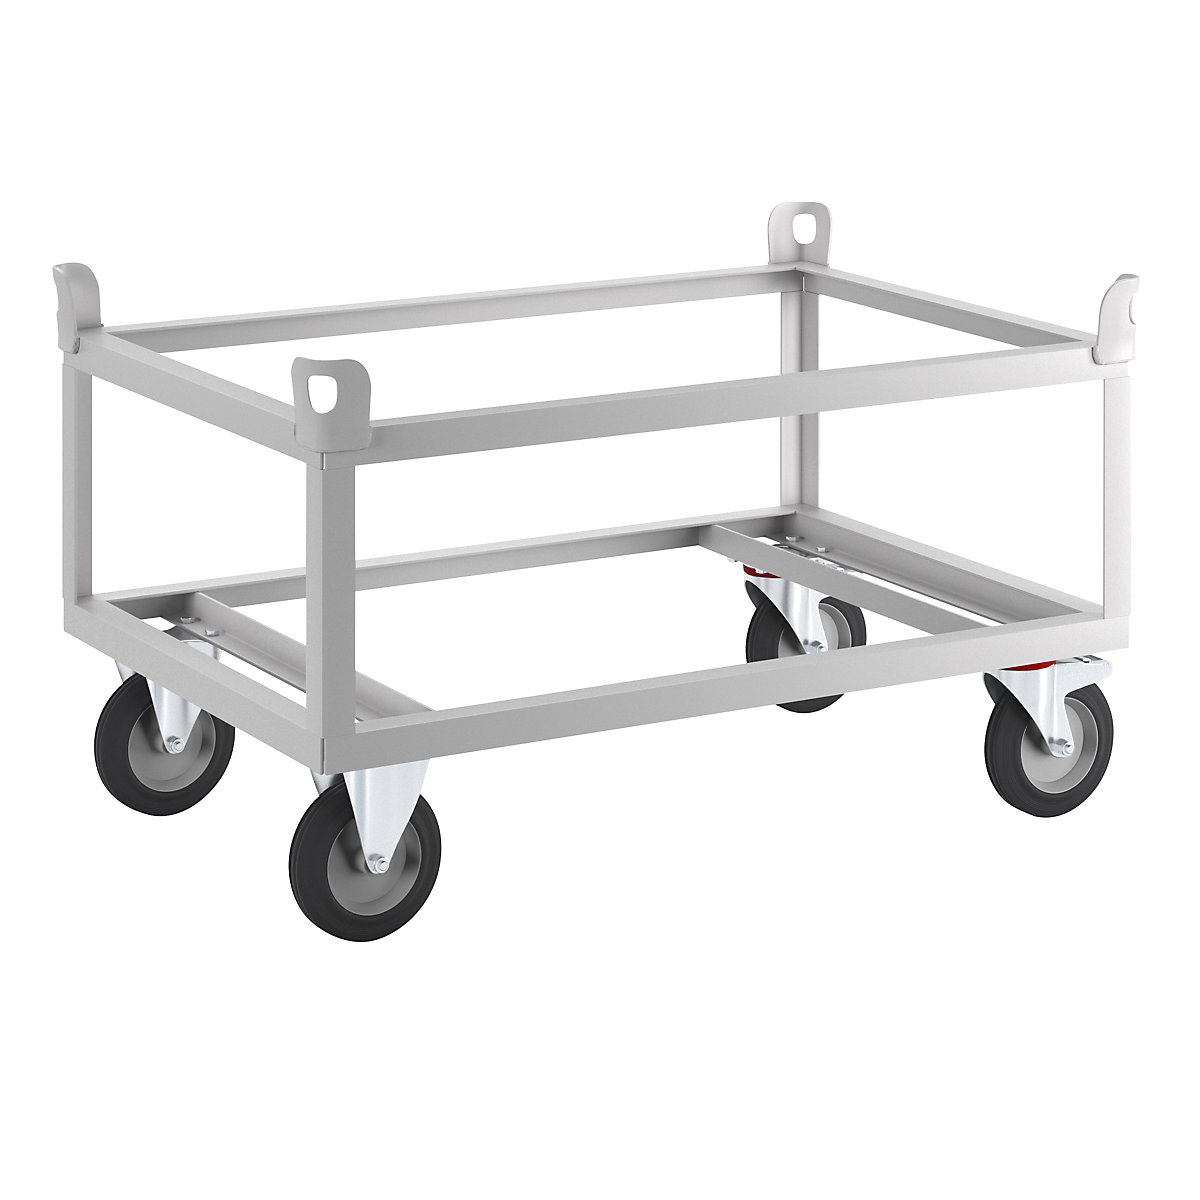 ESD dolly – eurokraft pro, ESD, max. load 500 kg, loading height 650 mm-4